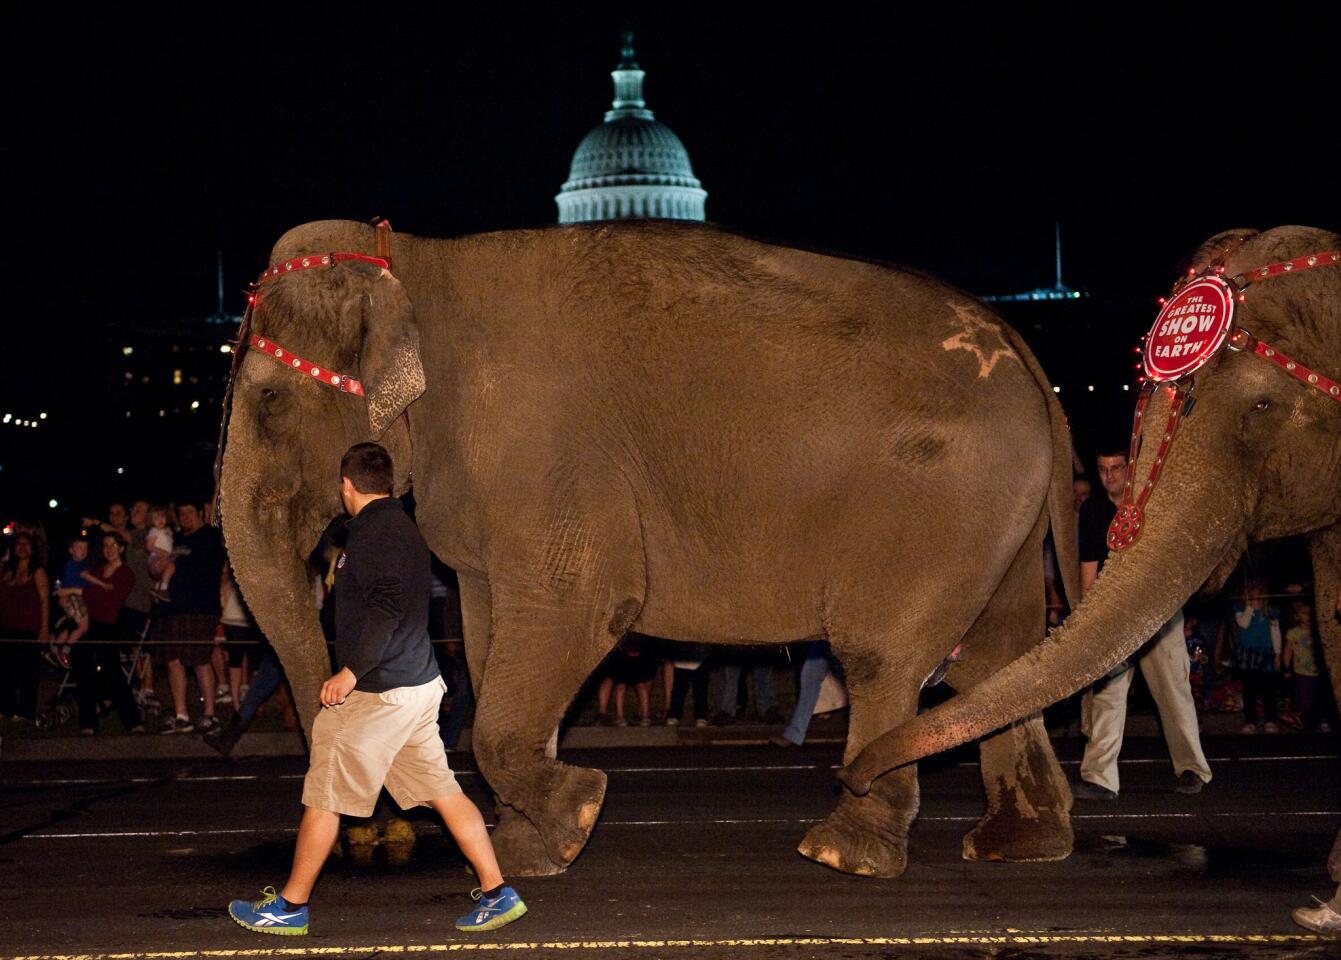 Elephants are led by handlers past the US Capitol on March 13, 2012 during the annual Pachyderm Parade to celebrate the arrival of Ringling Bros. and Barnum & Bailey Circus to Washington.